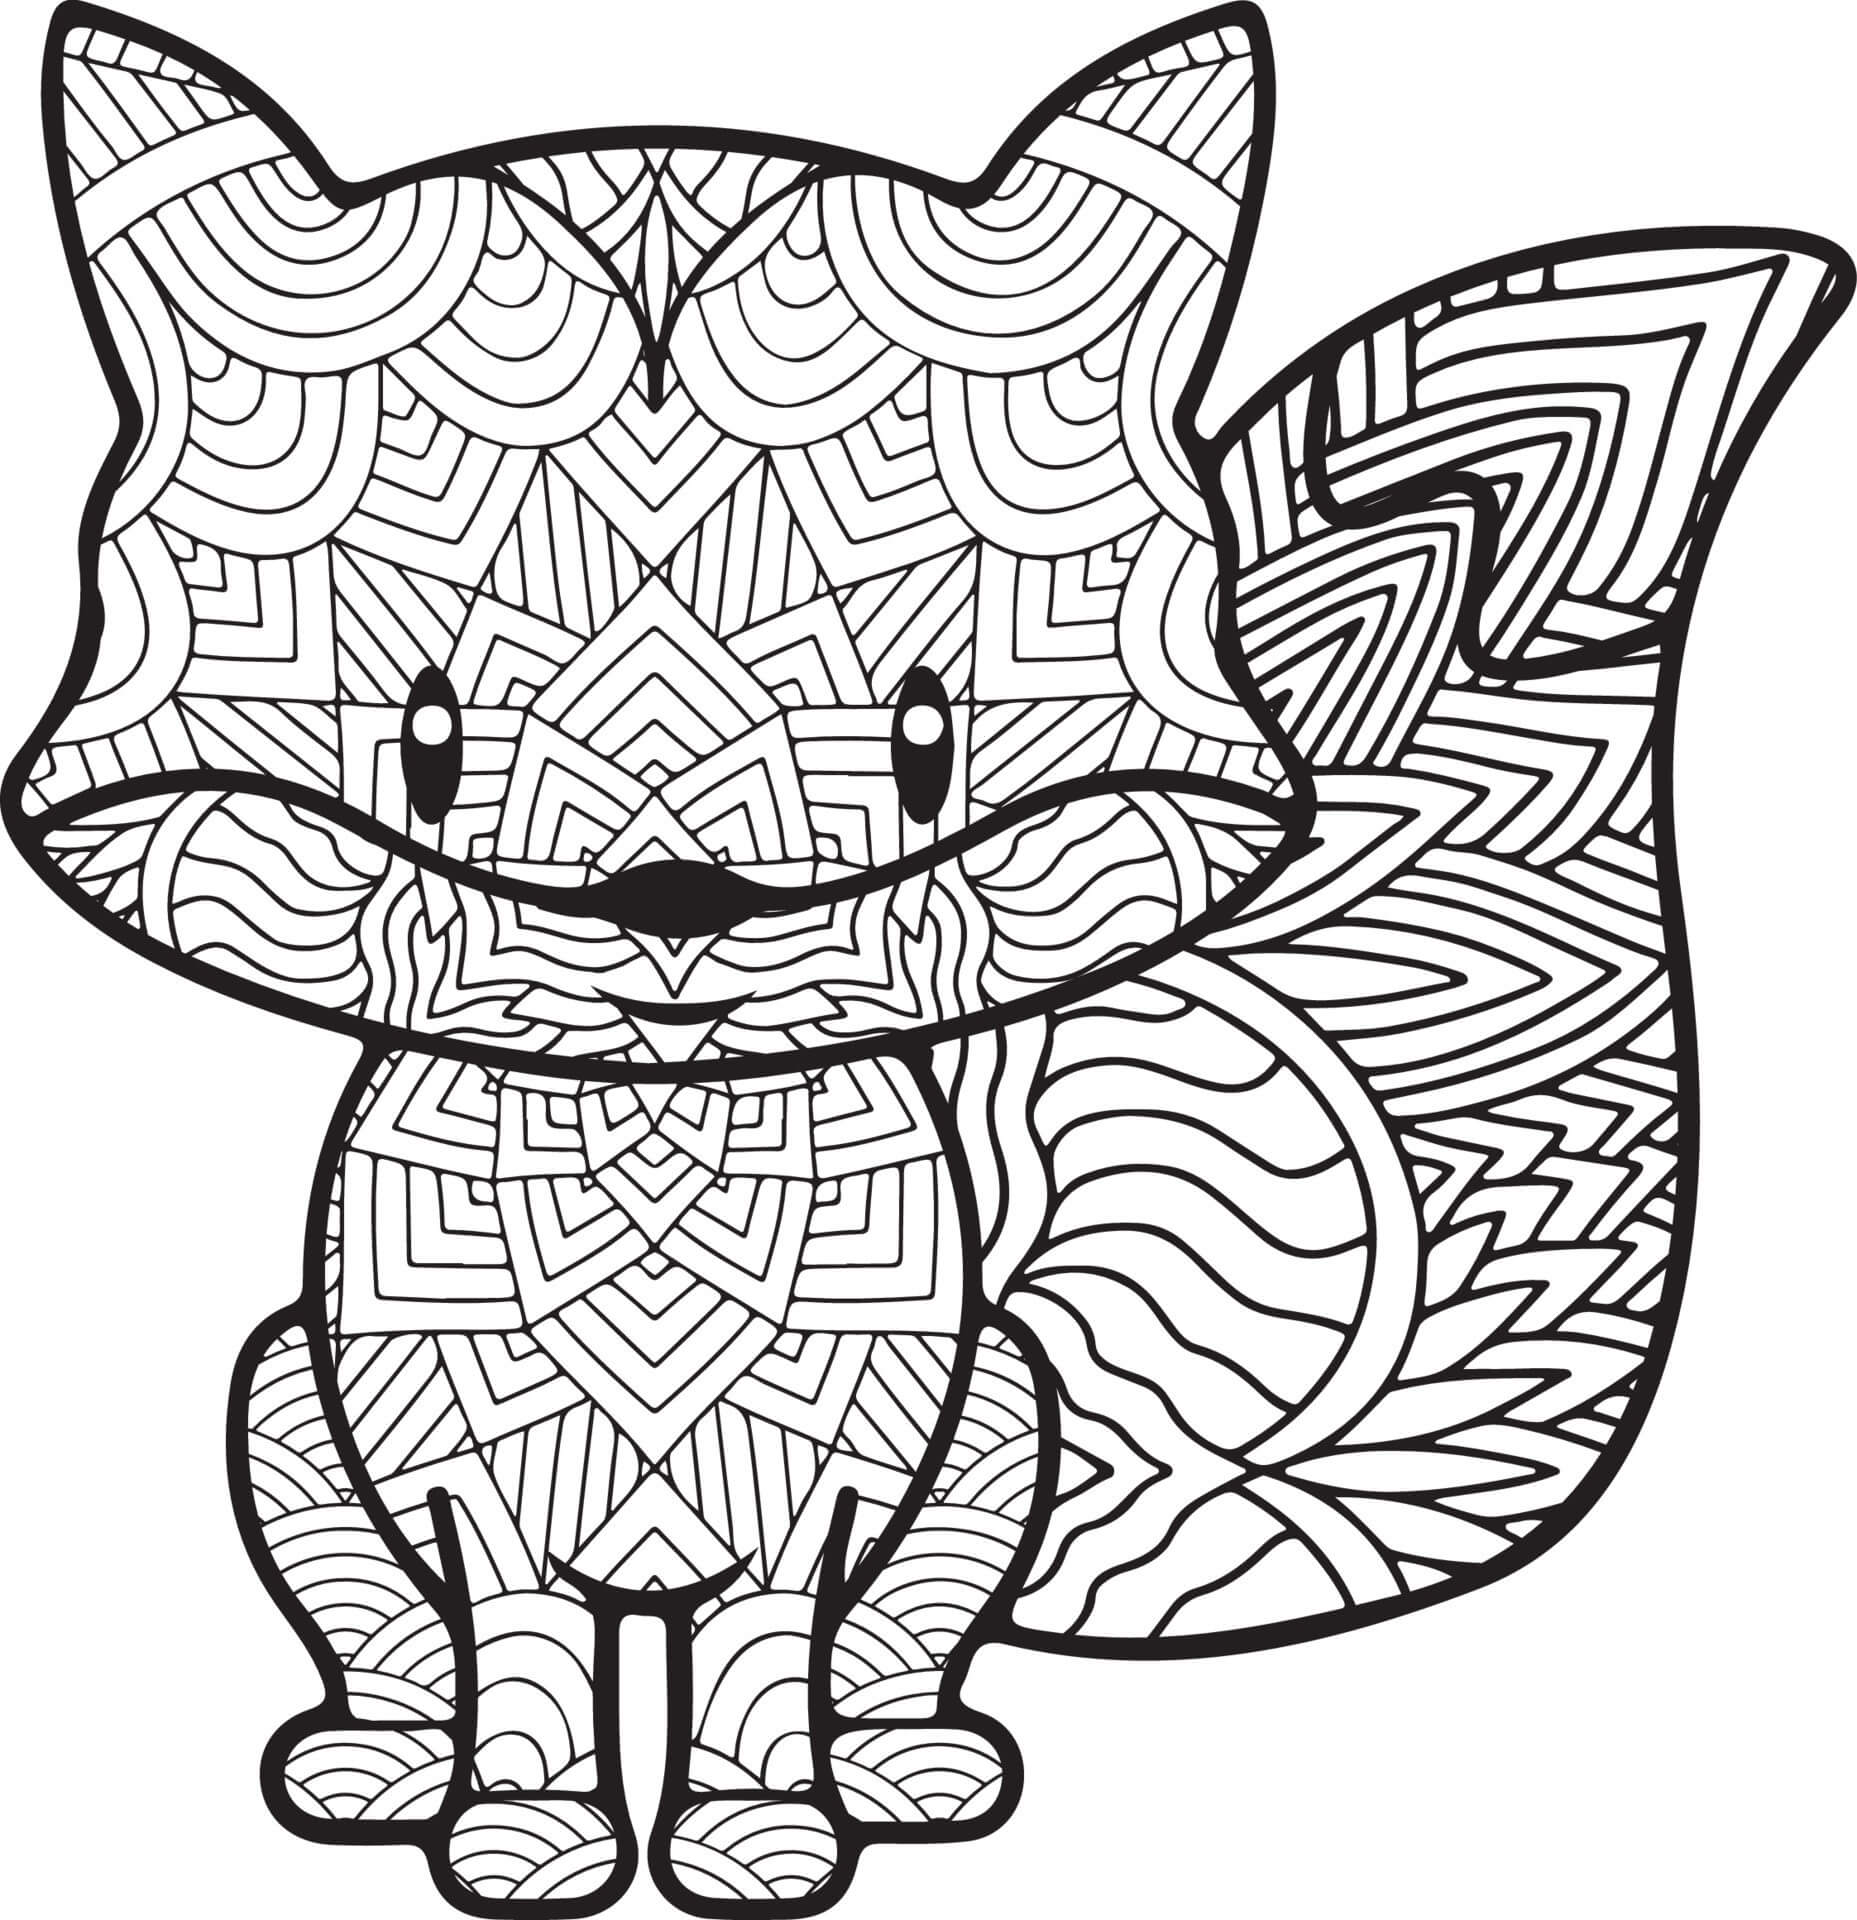 Smiling little fox mandala coloring page